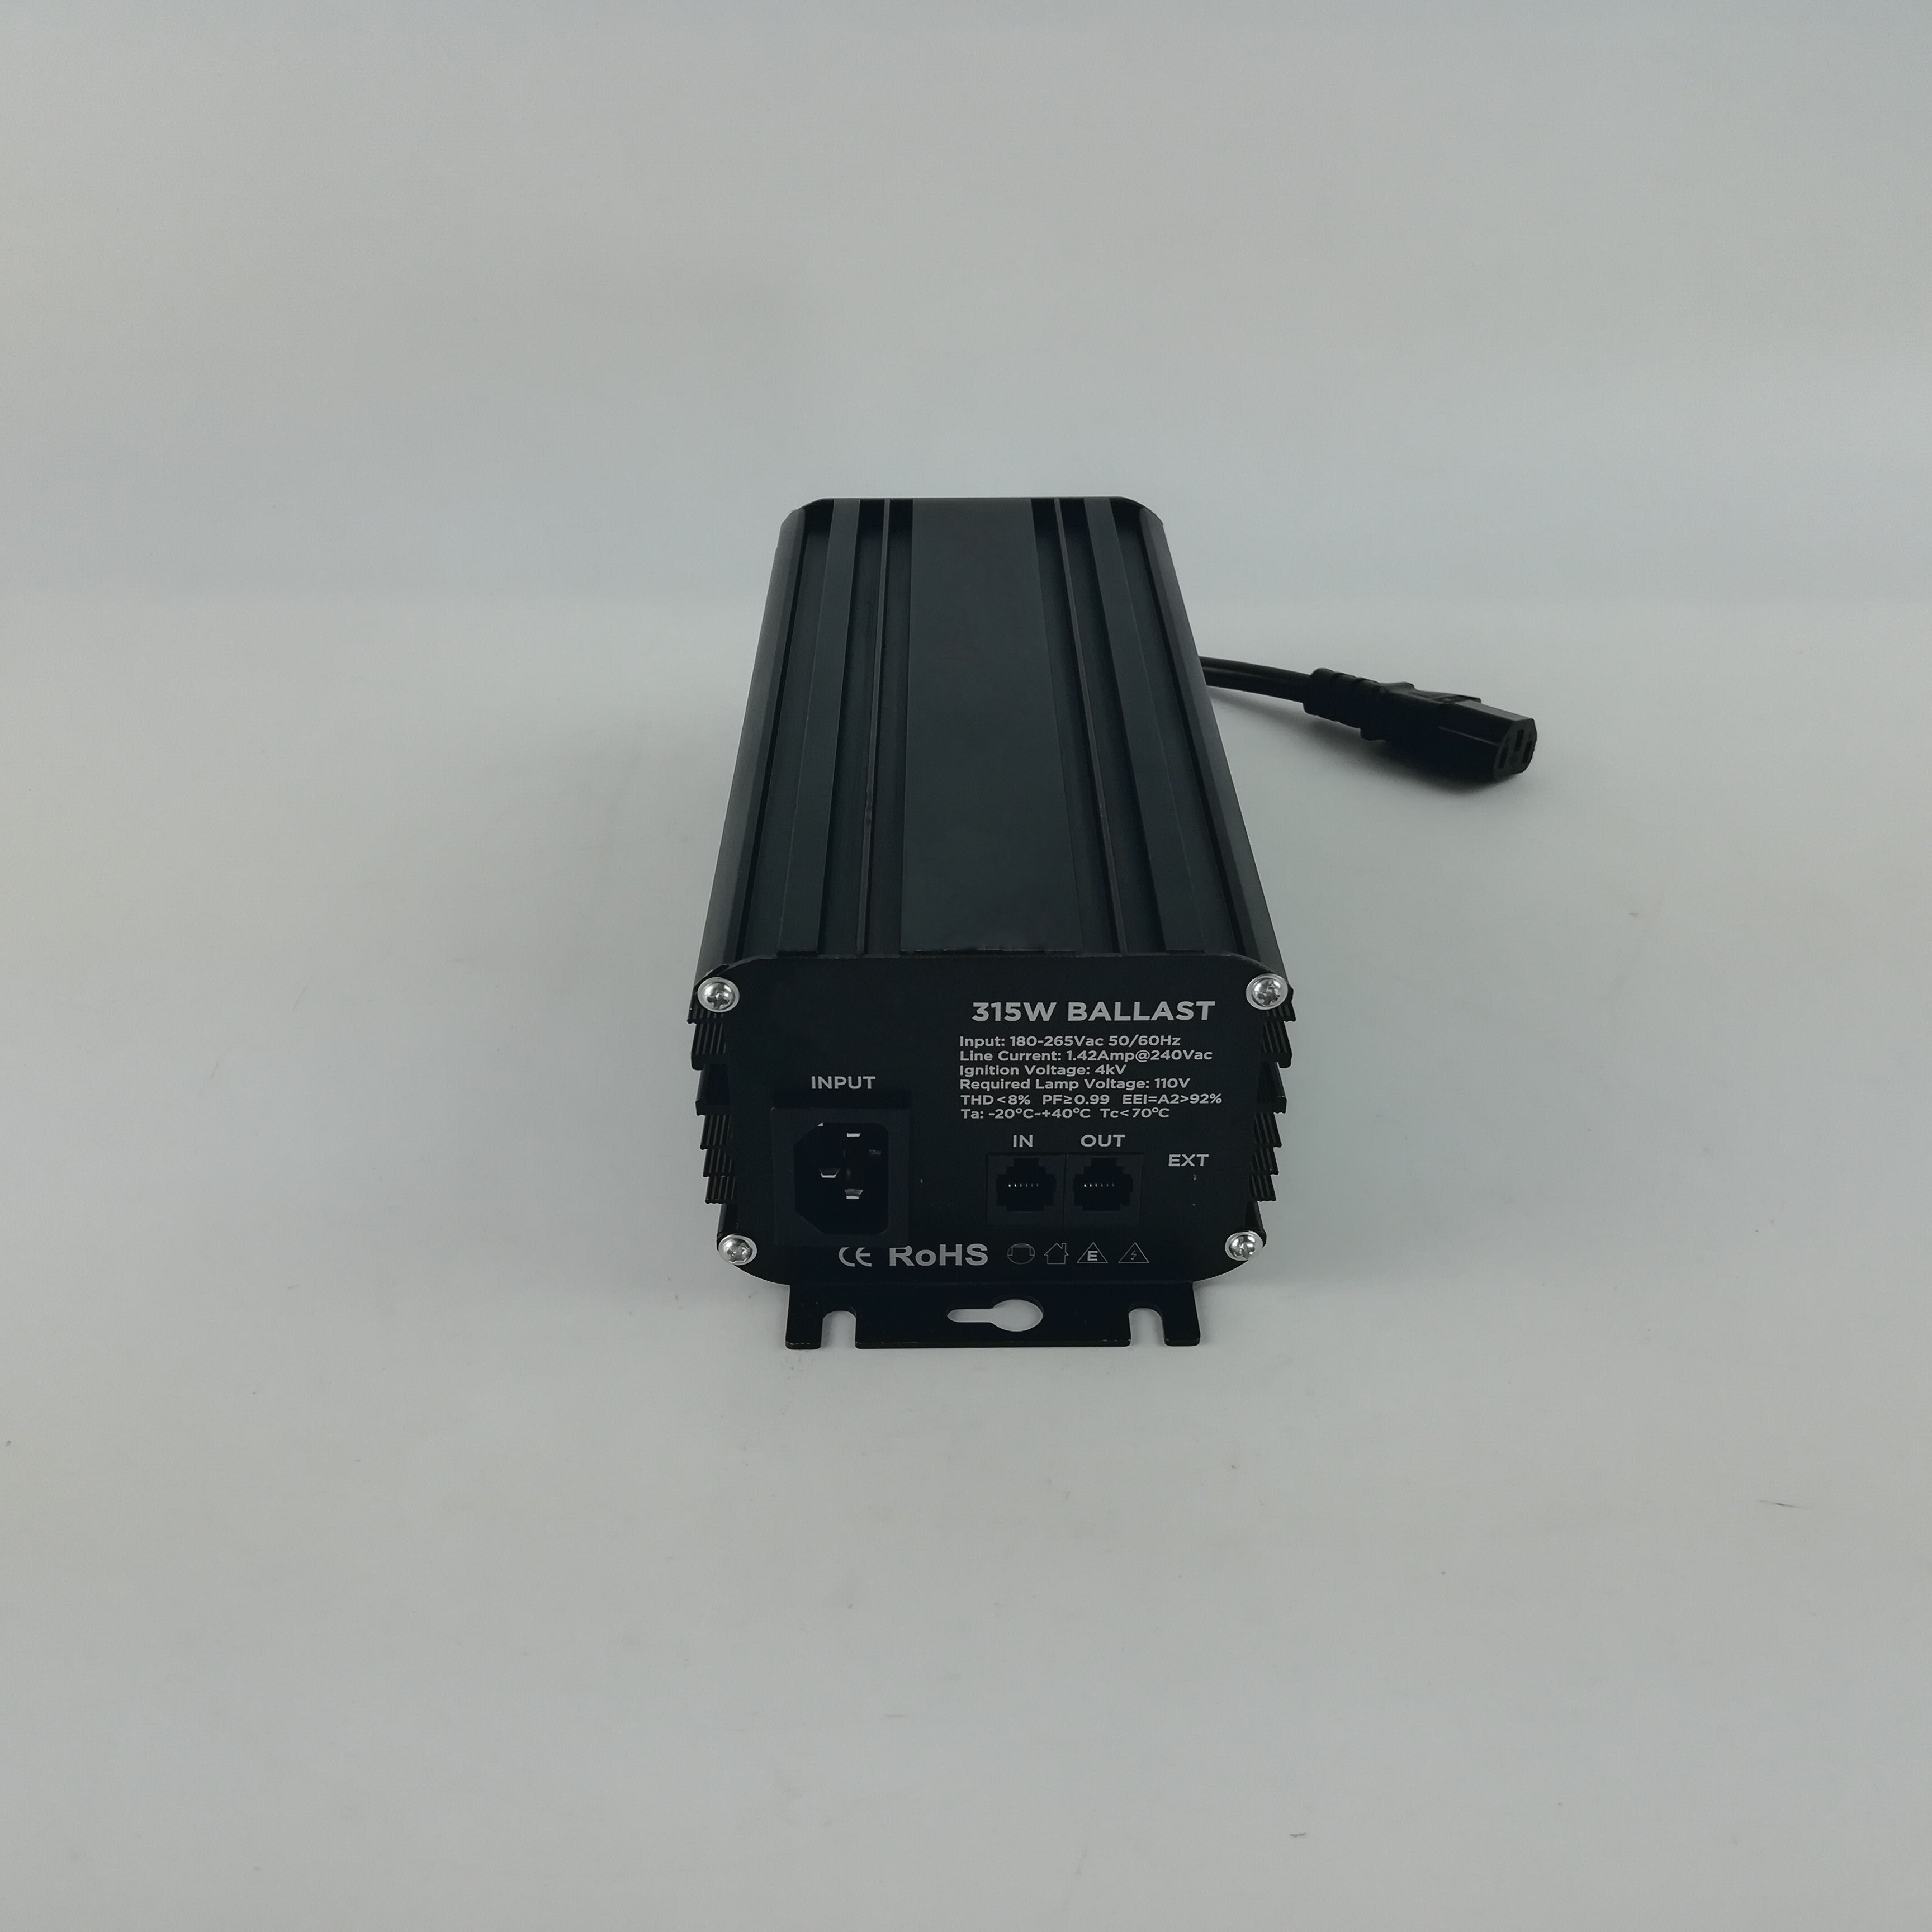 Remote Control Low Frequency 240v for Hydroponics and Greenhouse 315W CMH Ballast